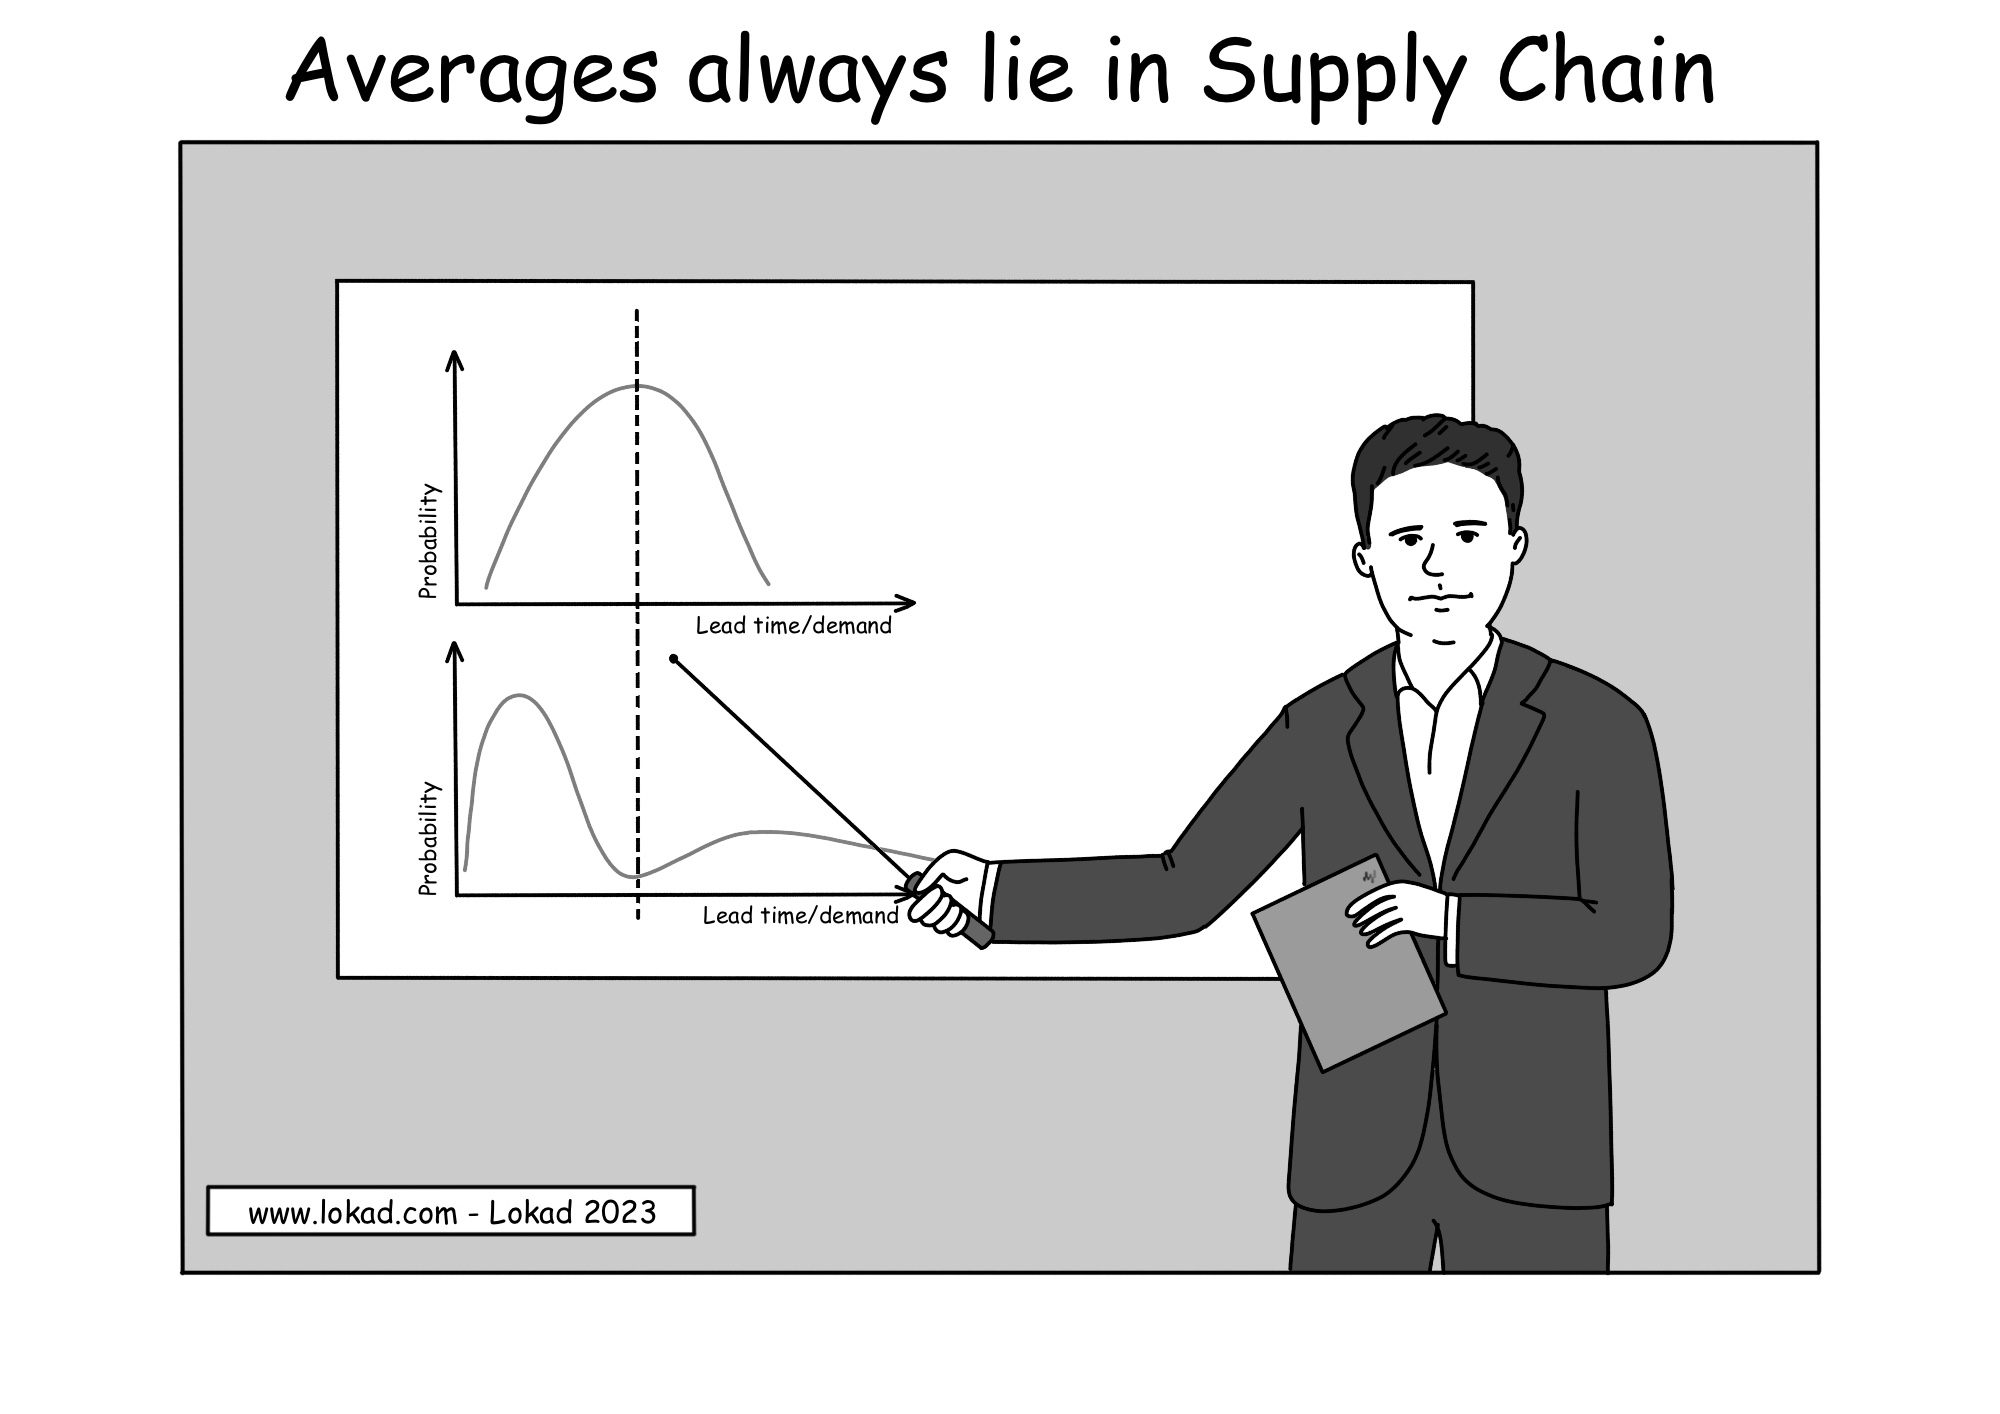 A comic from Lokad's supply chain series titled: Averages always lie in Supply Chain. It features a presenter with a pointer directed to a chart comparing two demand probability distributions, one above the other. The top distribution is bell-shaped, indicative of a normal distribution, while the bottom one is bimodal, with two peaks. The pointer is aimed at the area between the peaks of the bimodal distribution, suggesting it is the average, which is notably in a local minimum where the values are least frequent.